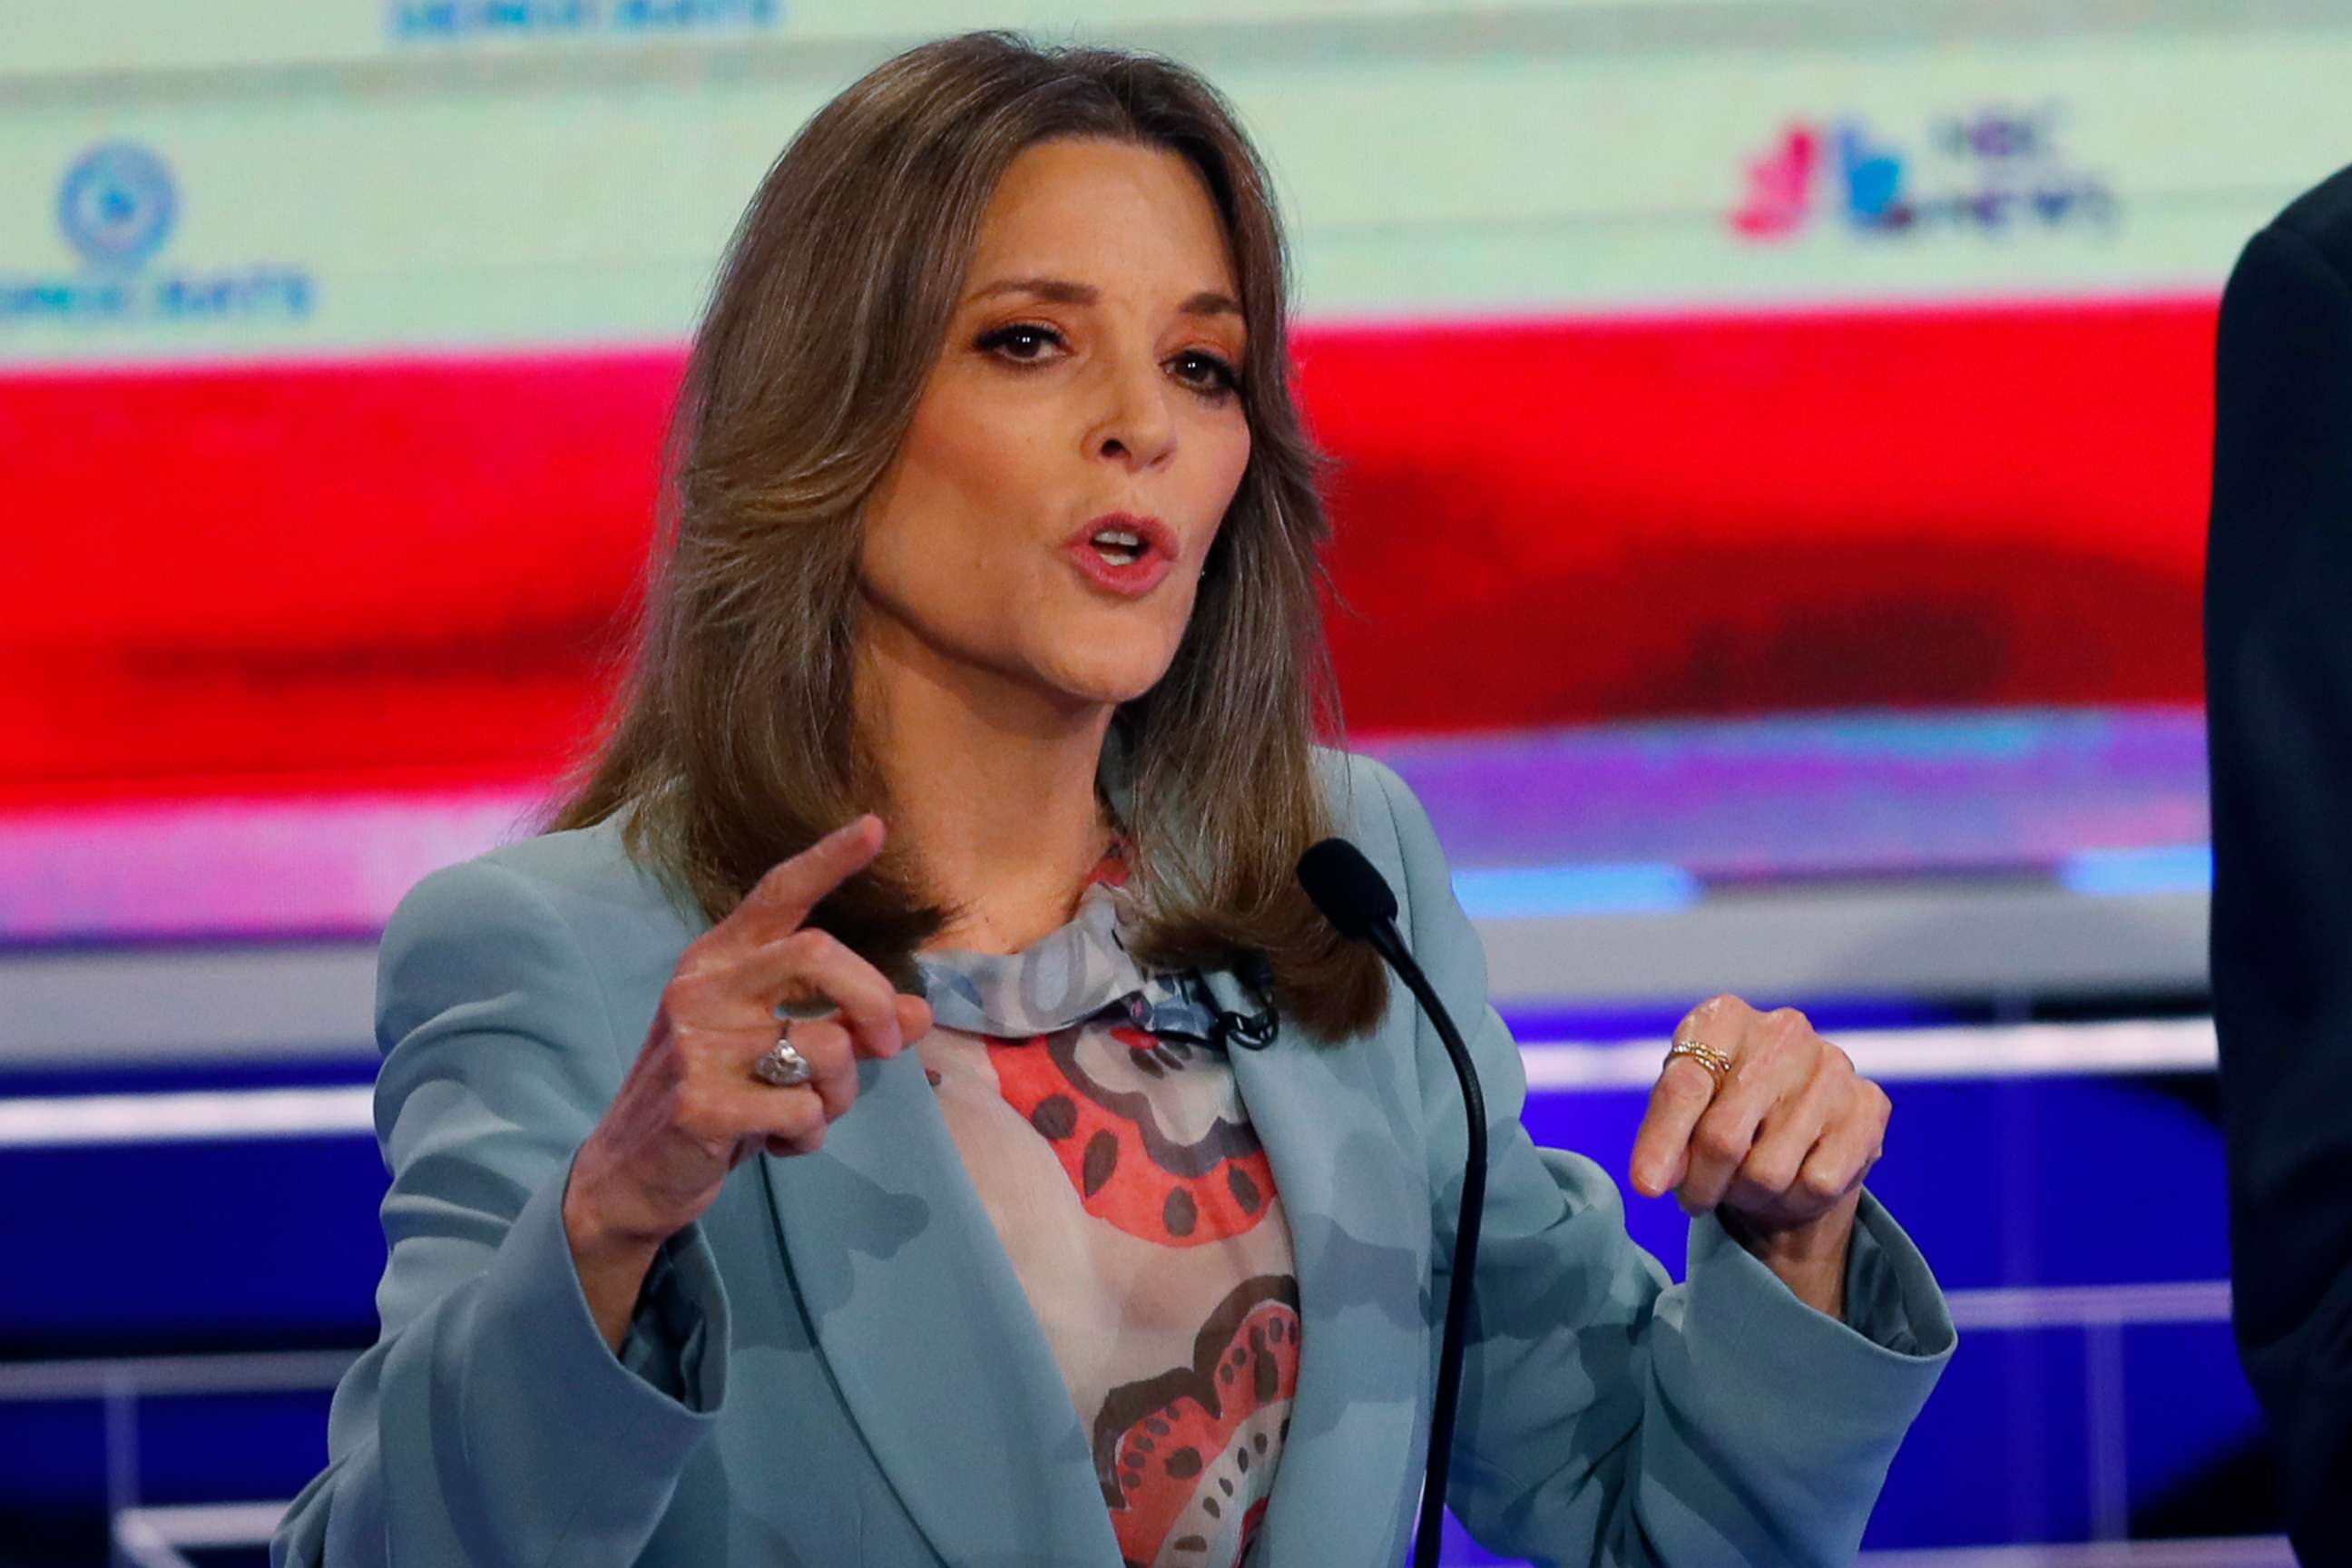 PHOTO: Marianne Williamson participates in the second night of the first 2020 democratic presidential debate at the Adrienne Arsht Center for the Performing Arts in Miami, June 27, 2019.